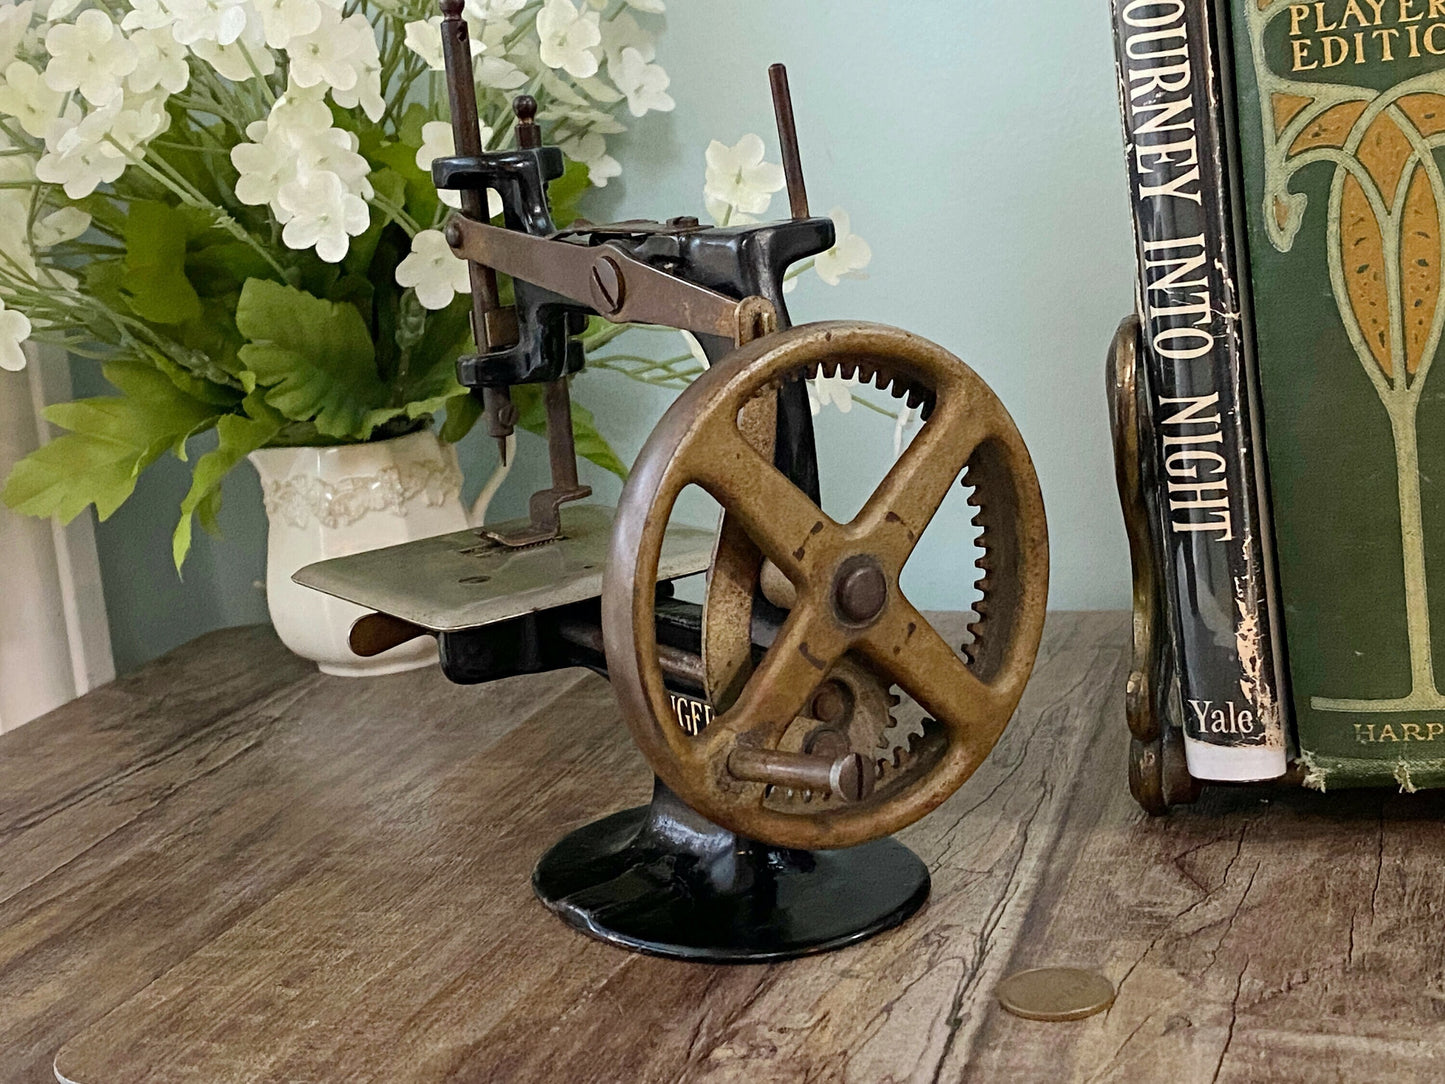 Antique Singer Sewing Machine, Model 20 with 4 Spokes